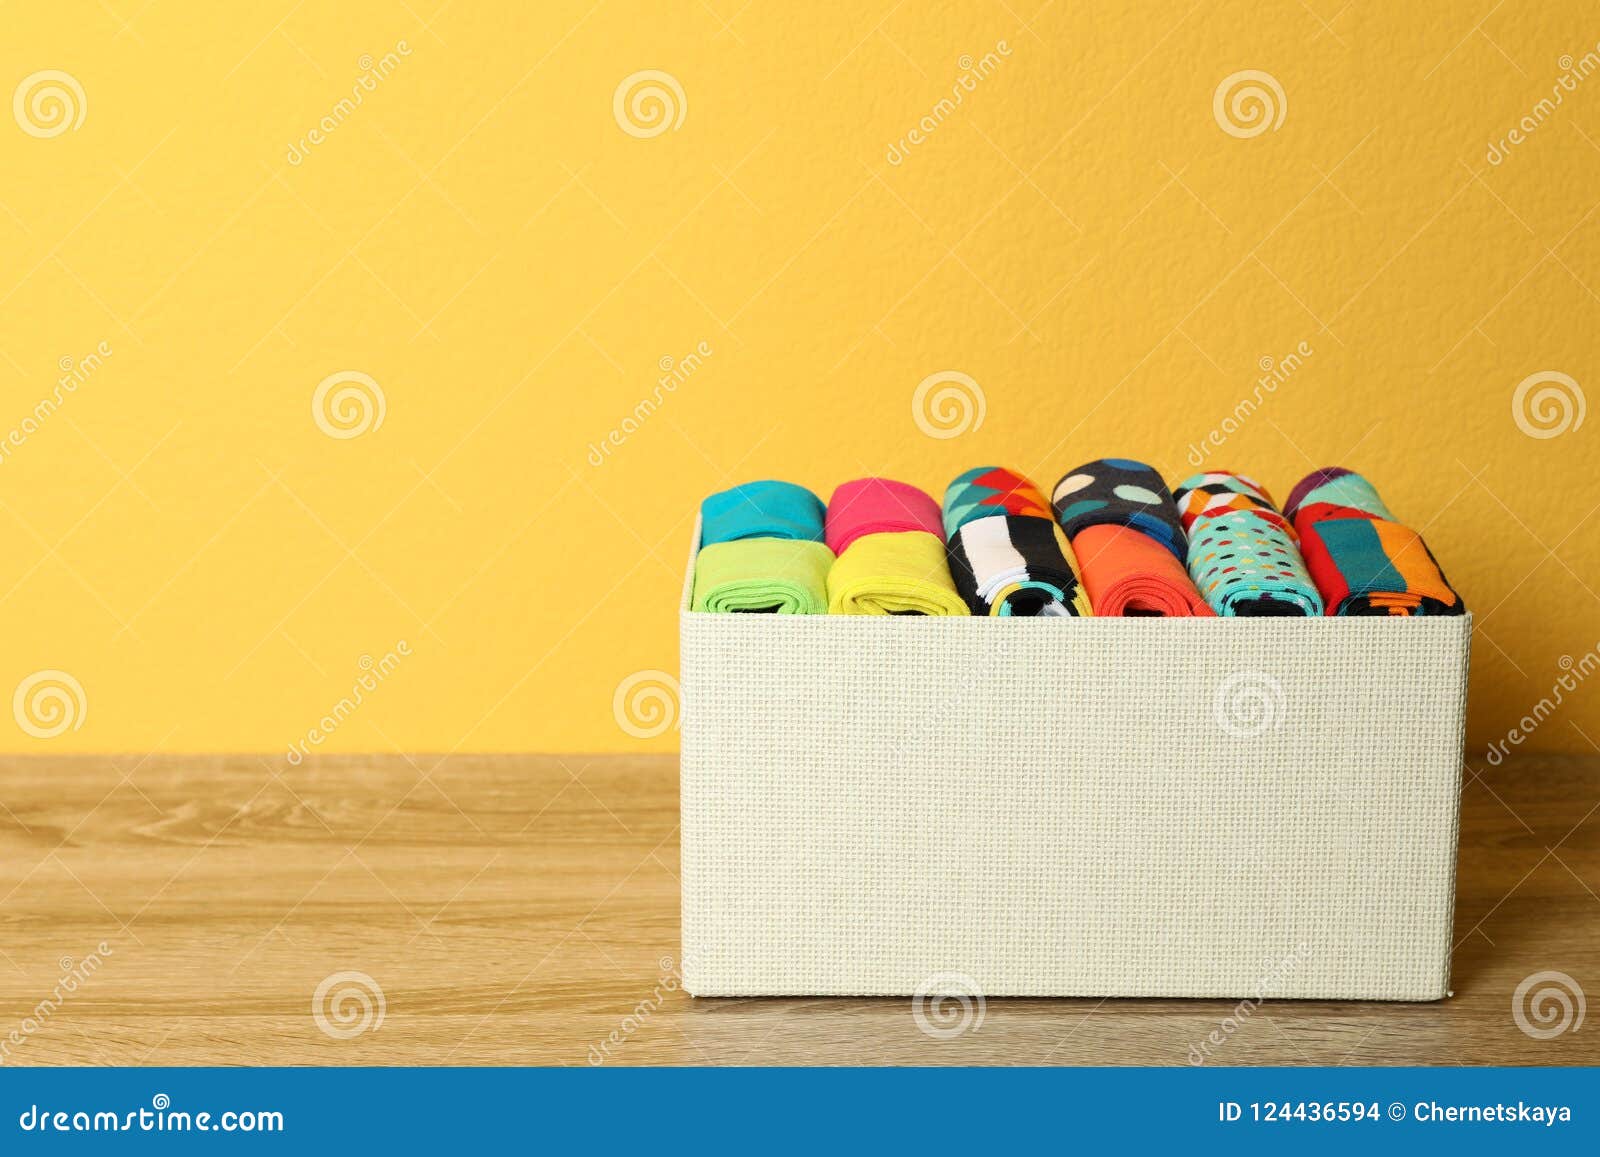 Box with Colorful Socks on Wooden Table Stock Photo - Image of clean ...